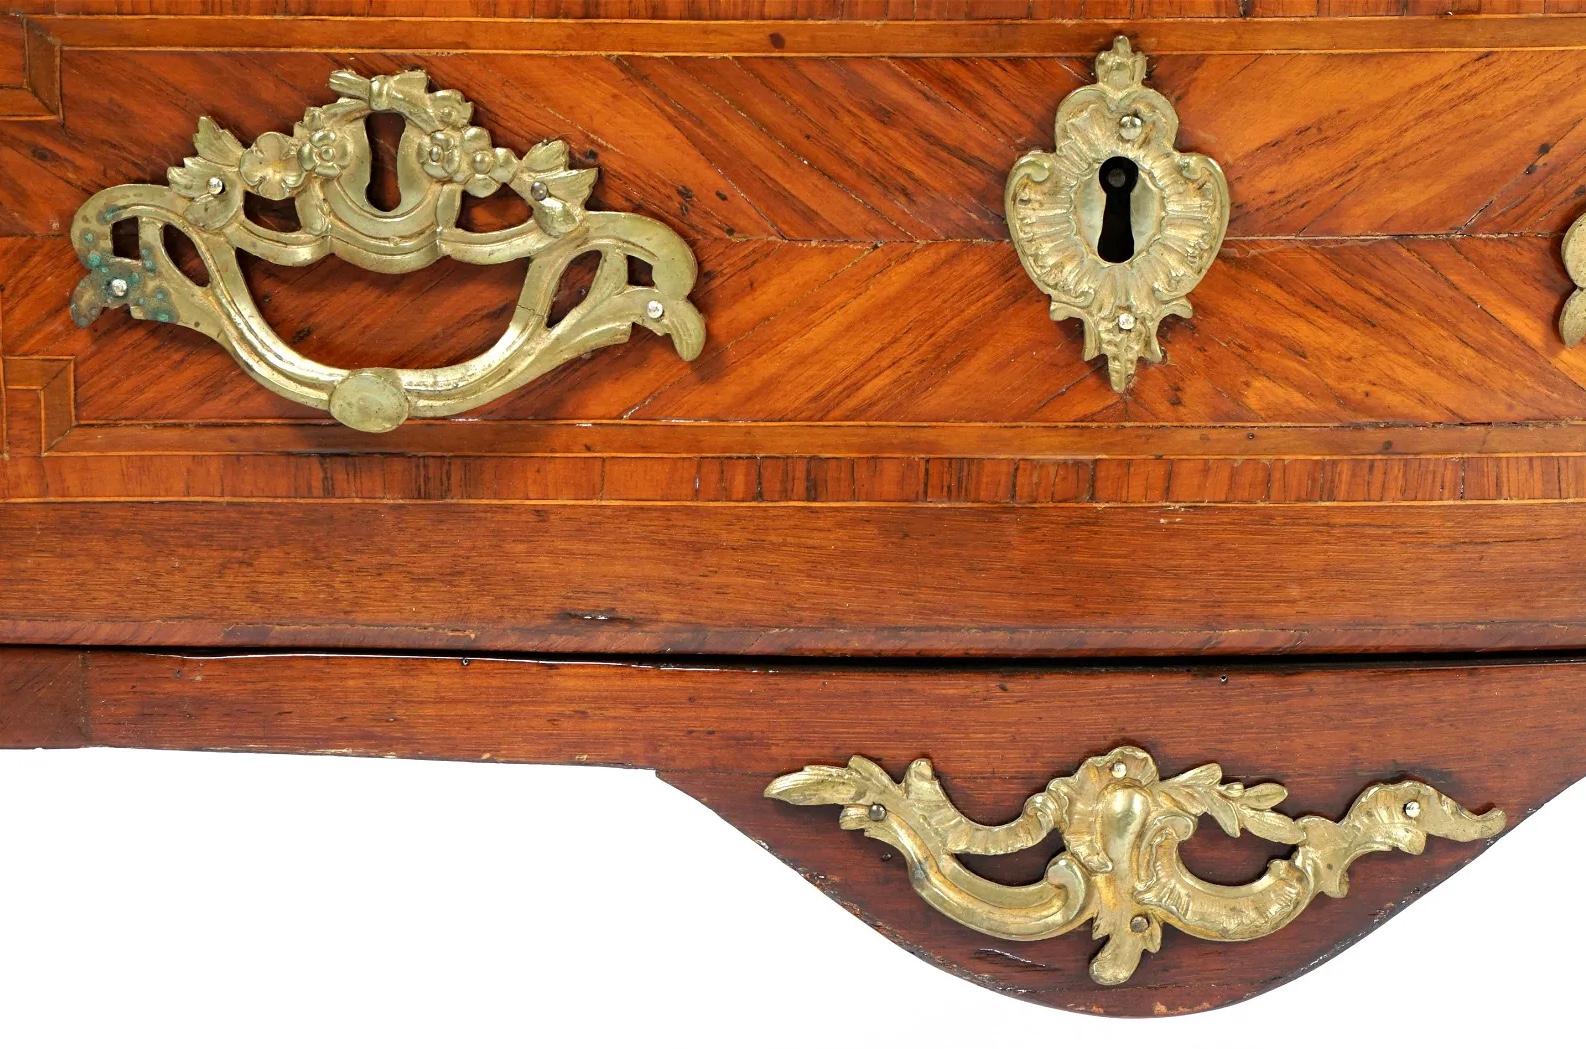 This is a masterpiece of 18th Century French Commode with exquisite inlay made from walnut, satinwood and tulipwood. In the bombe form having three drawers with original bronze handles. Ormolu bronze mounts on the corners and sabots on the feet. The